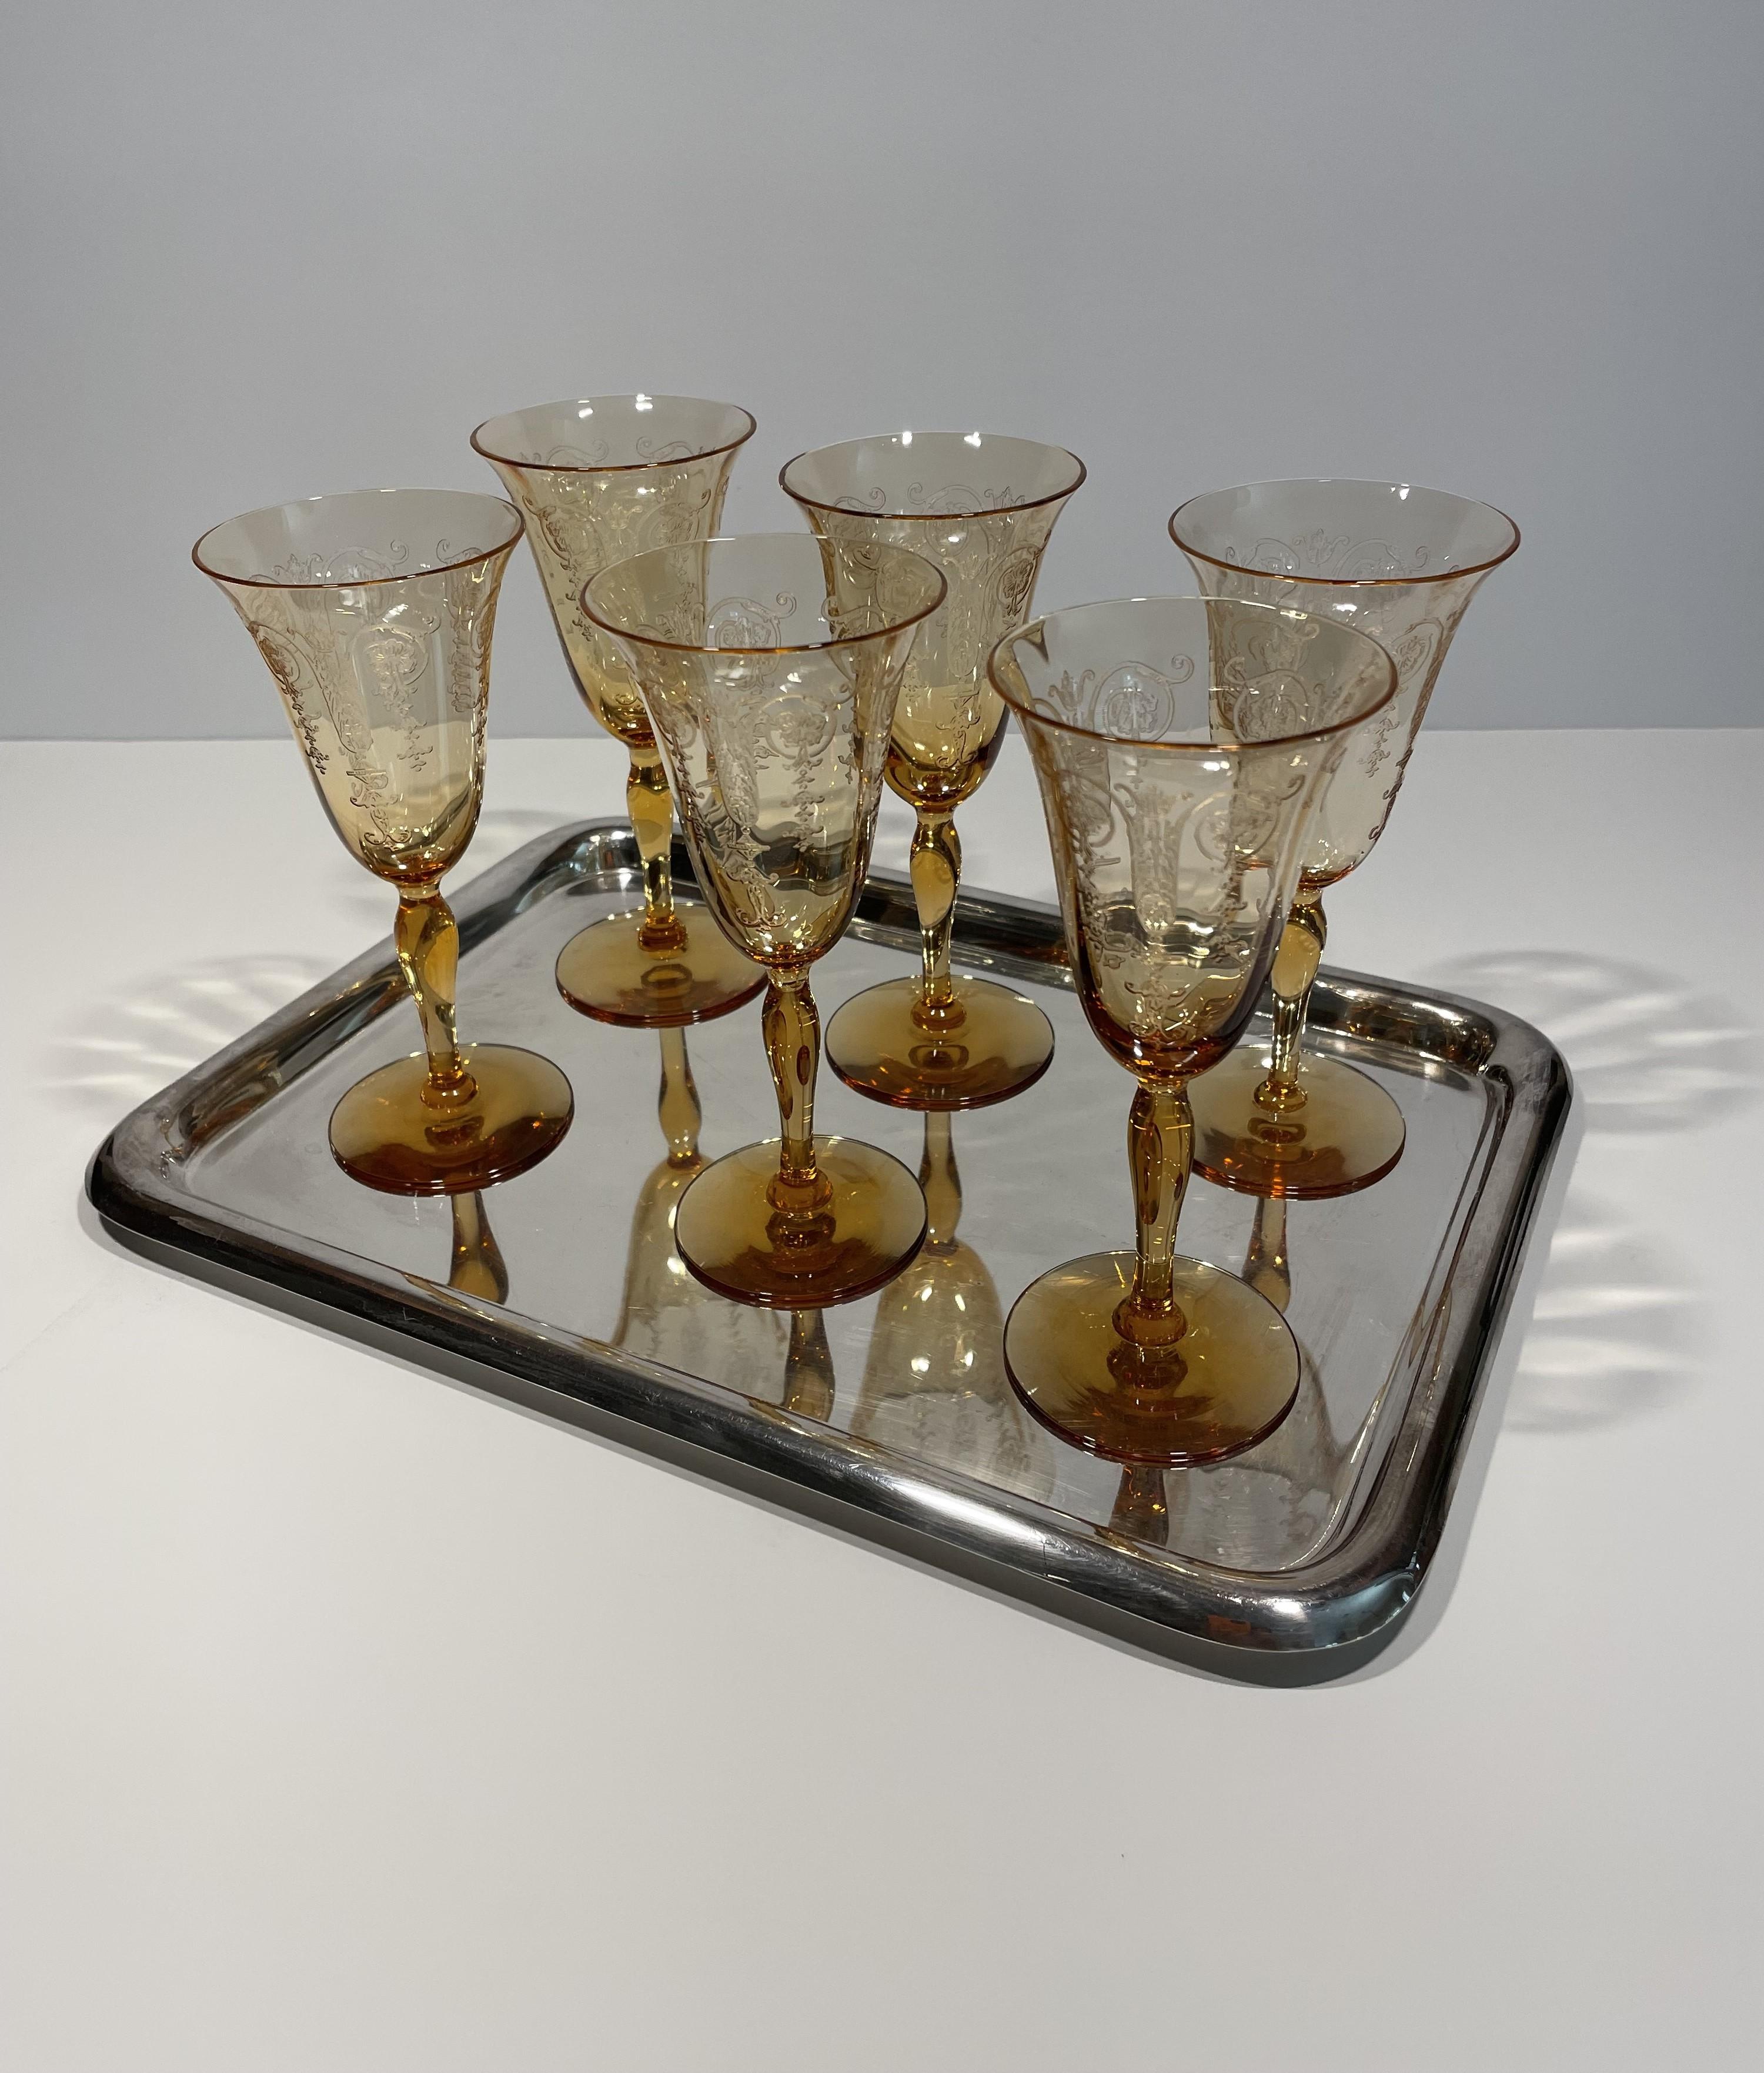 This set of etched French crystal liqueur glasses, which dates to the 1930s, is in mint condition. The subtle amber color of the glasses will enhance the color of your drinks nicely. I have curated this set of vintage glasses with a very mid-century